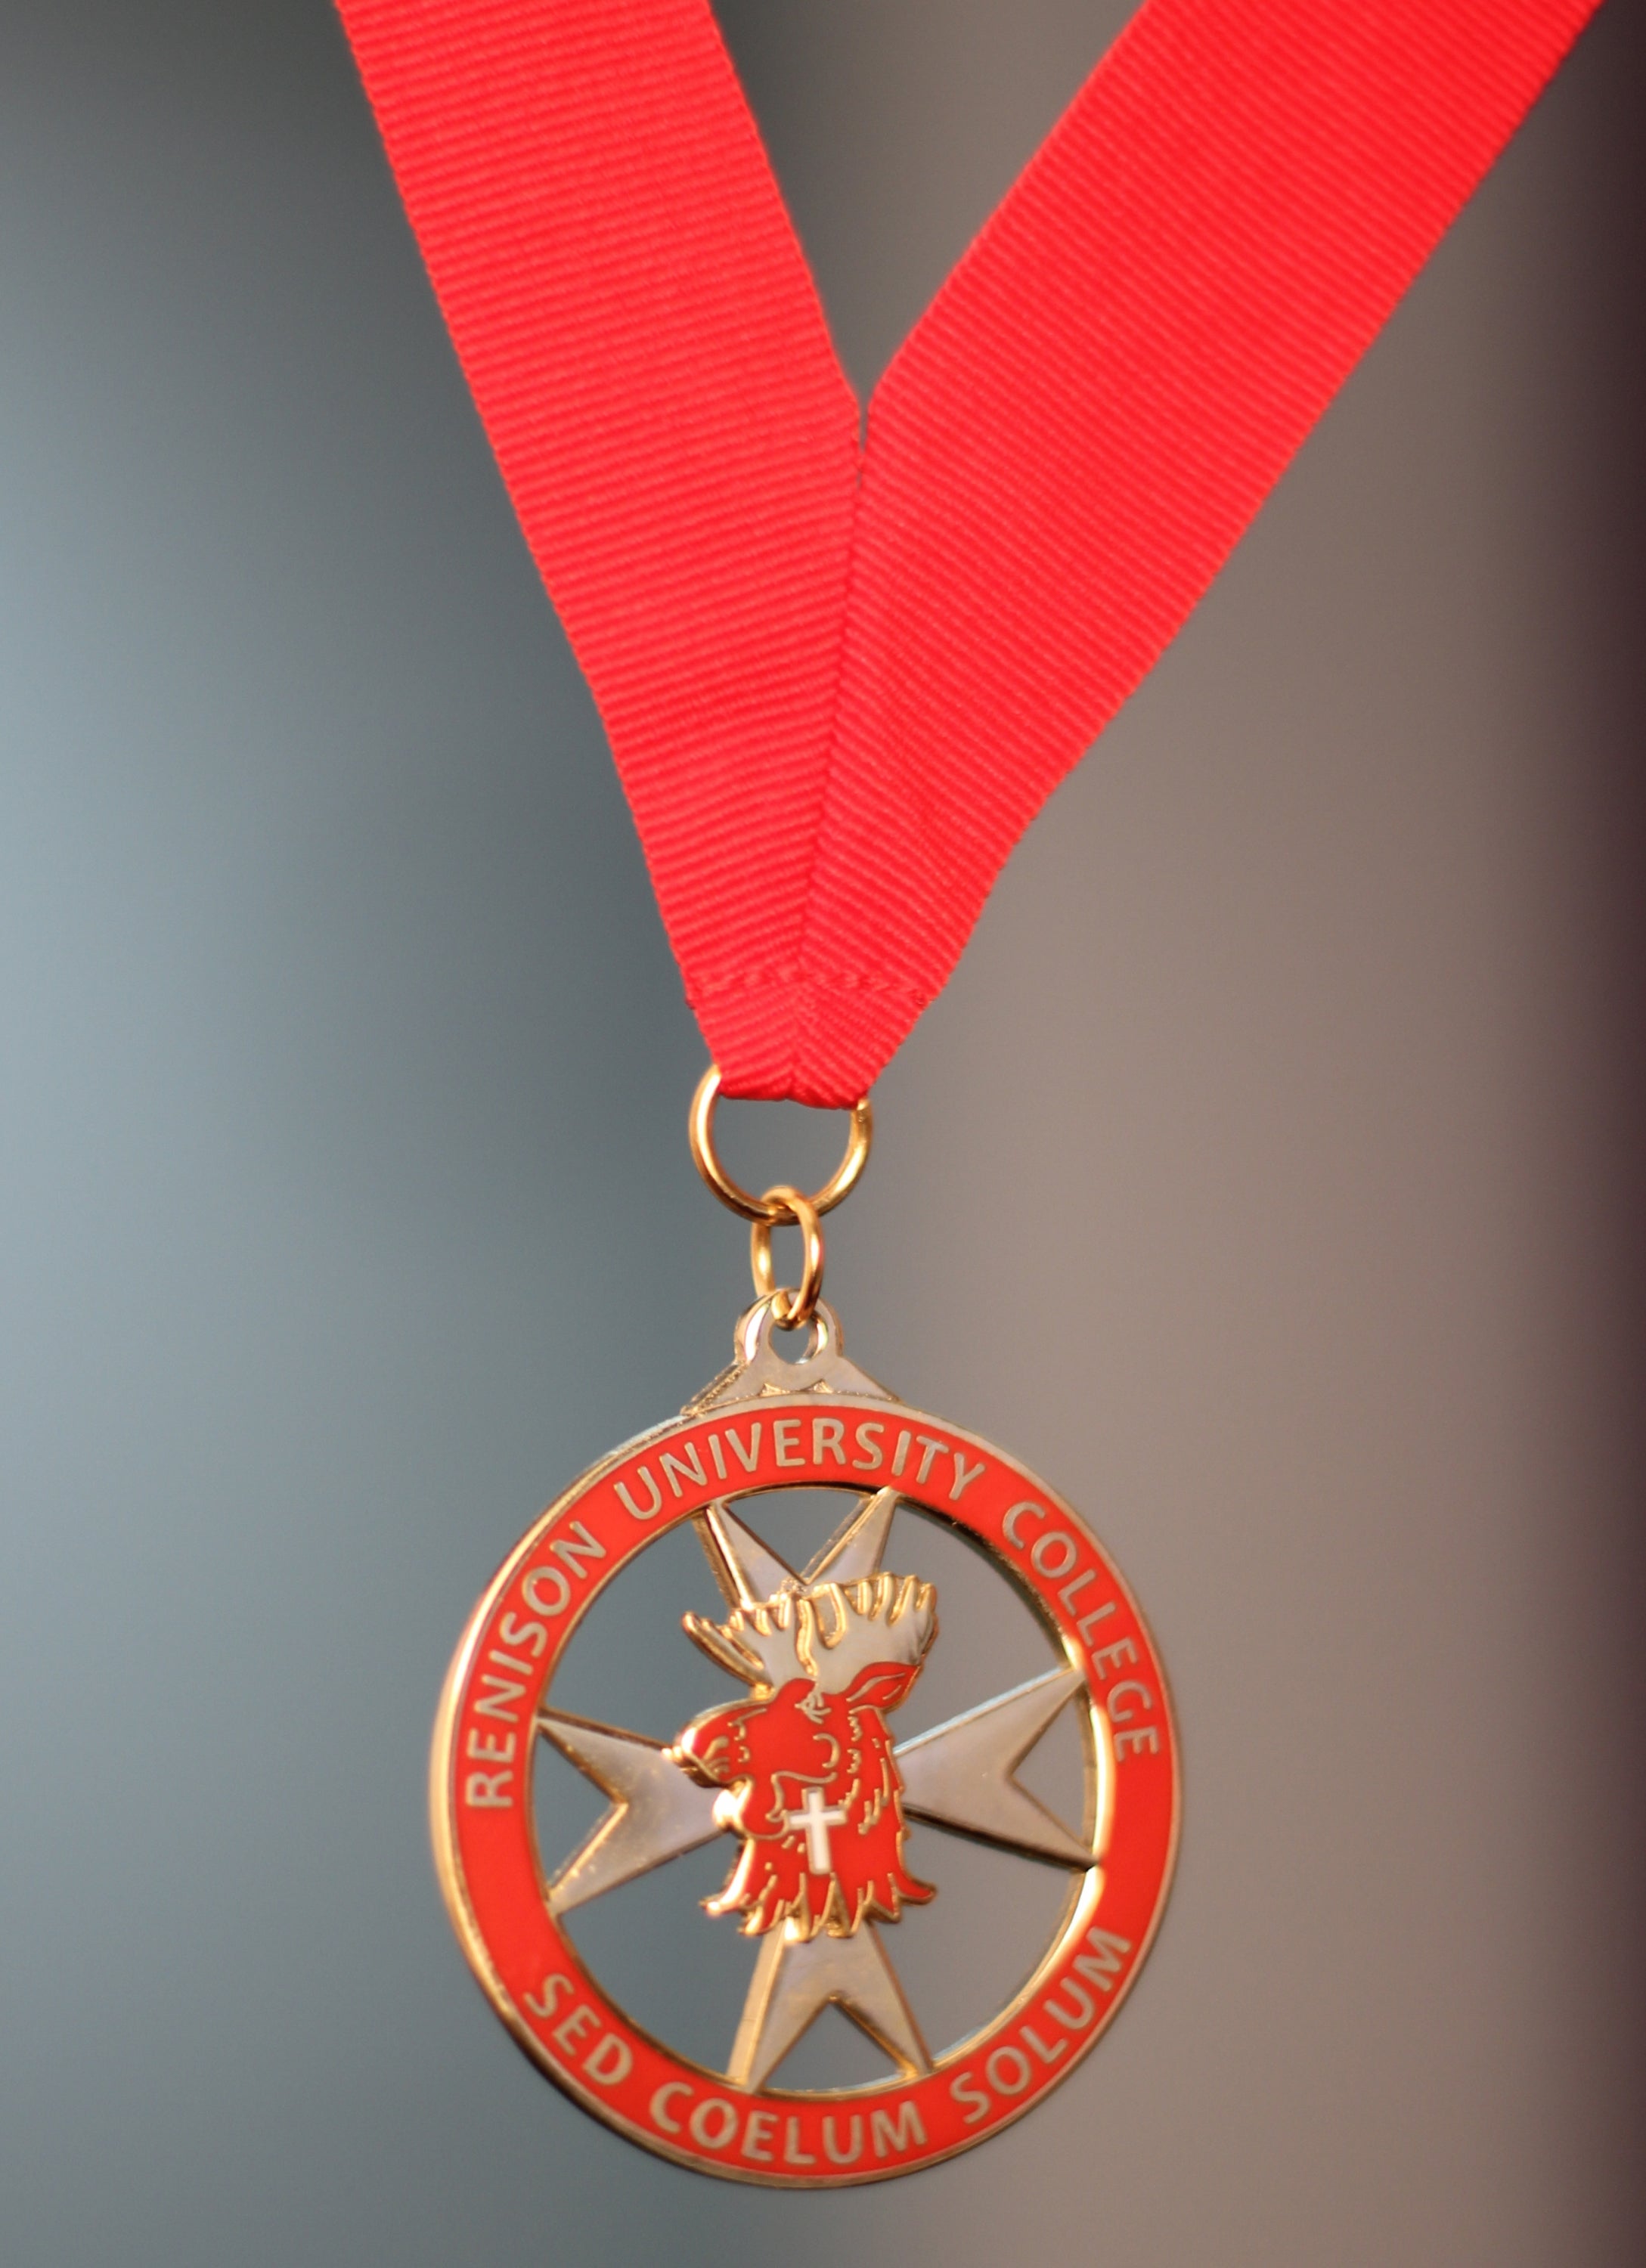 Red medal hung from a red ribbon.